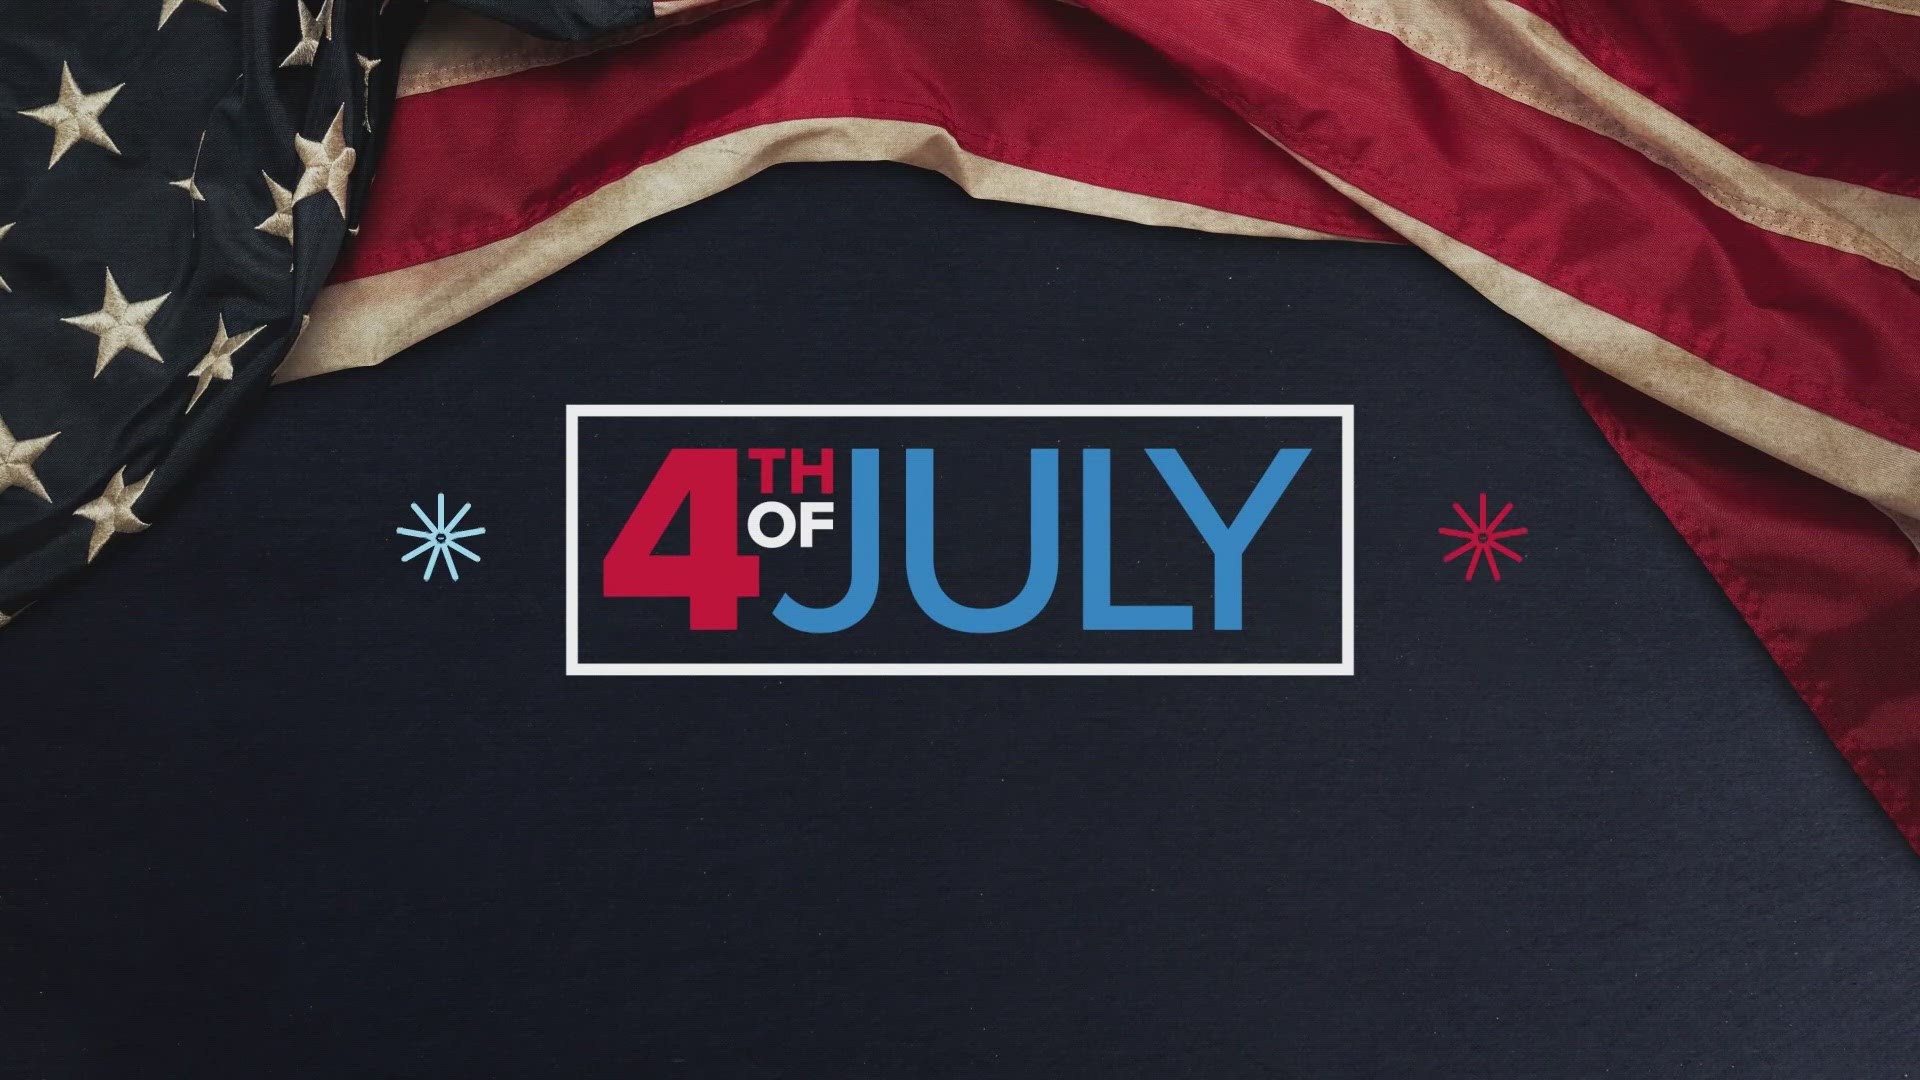 Several St. Louis area families celebrate the Fourth of July holiday Tuesday. People all across the Bi-state celebrated America’s 247th birthday.